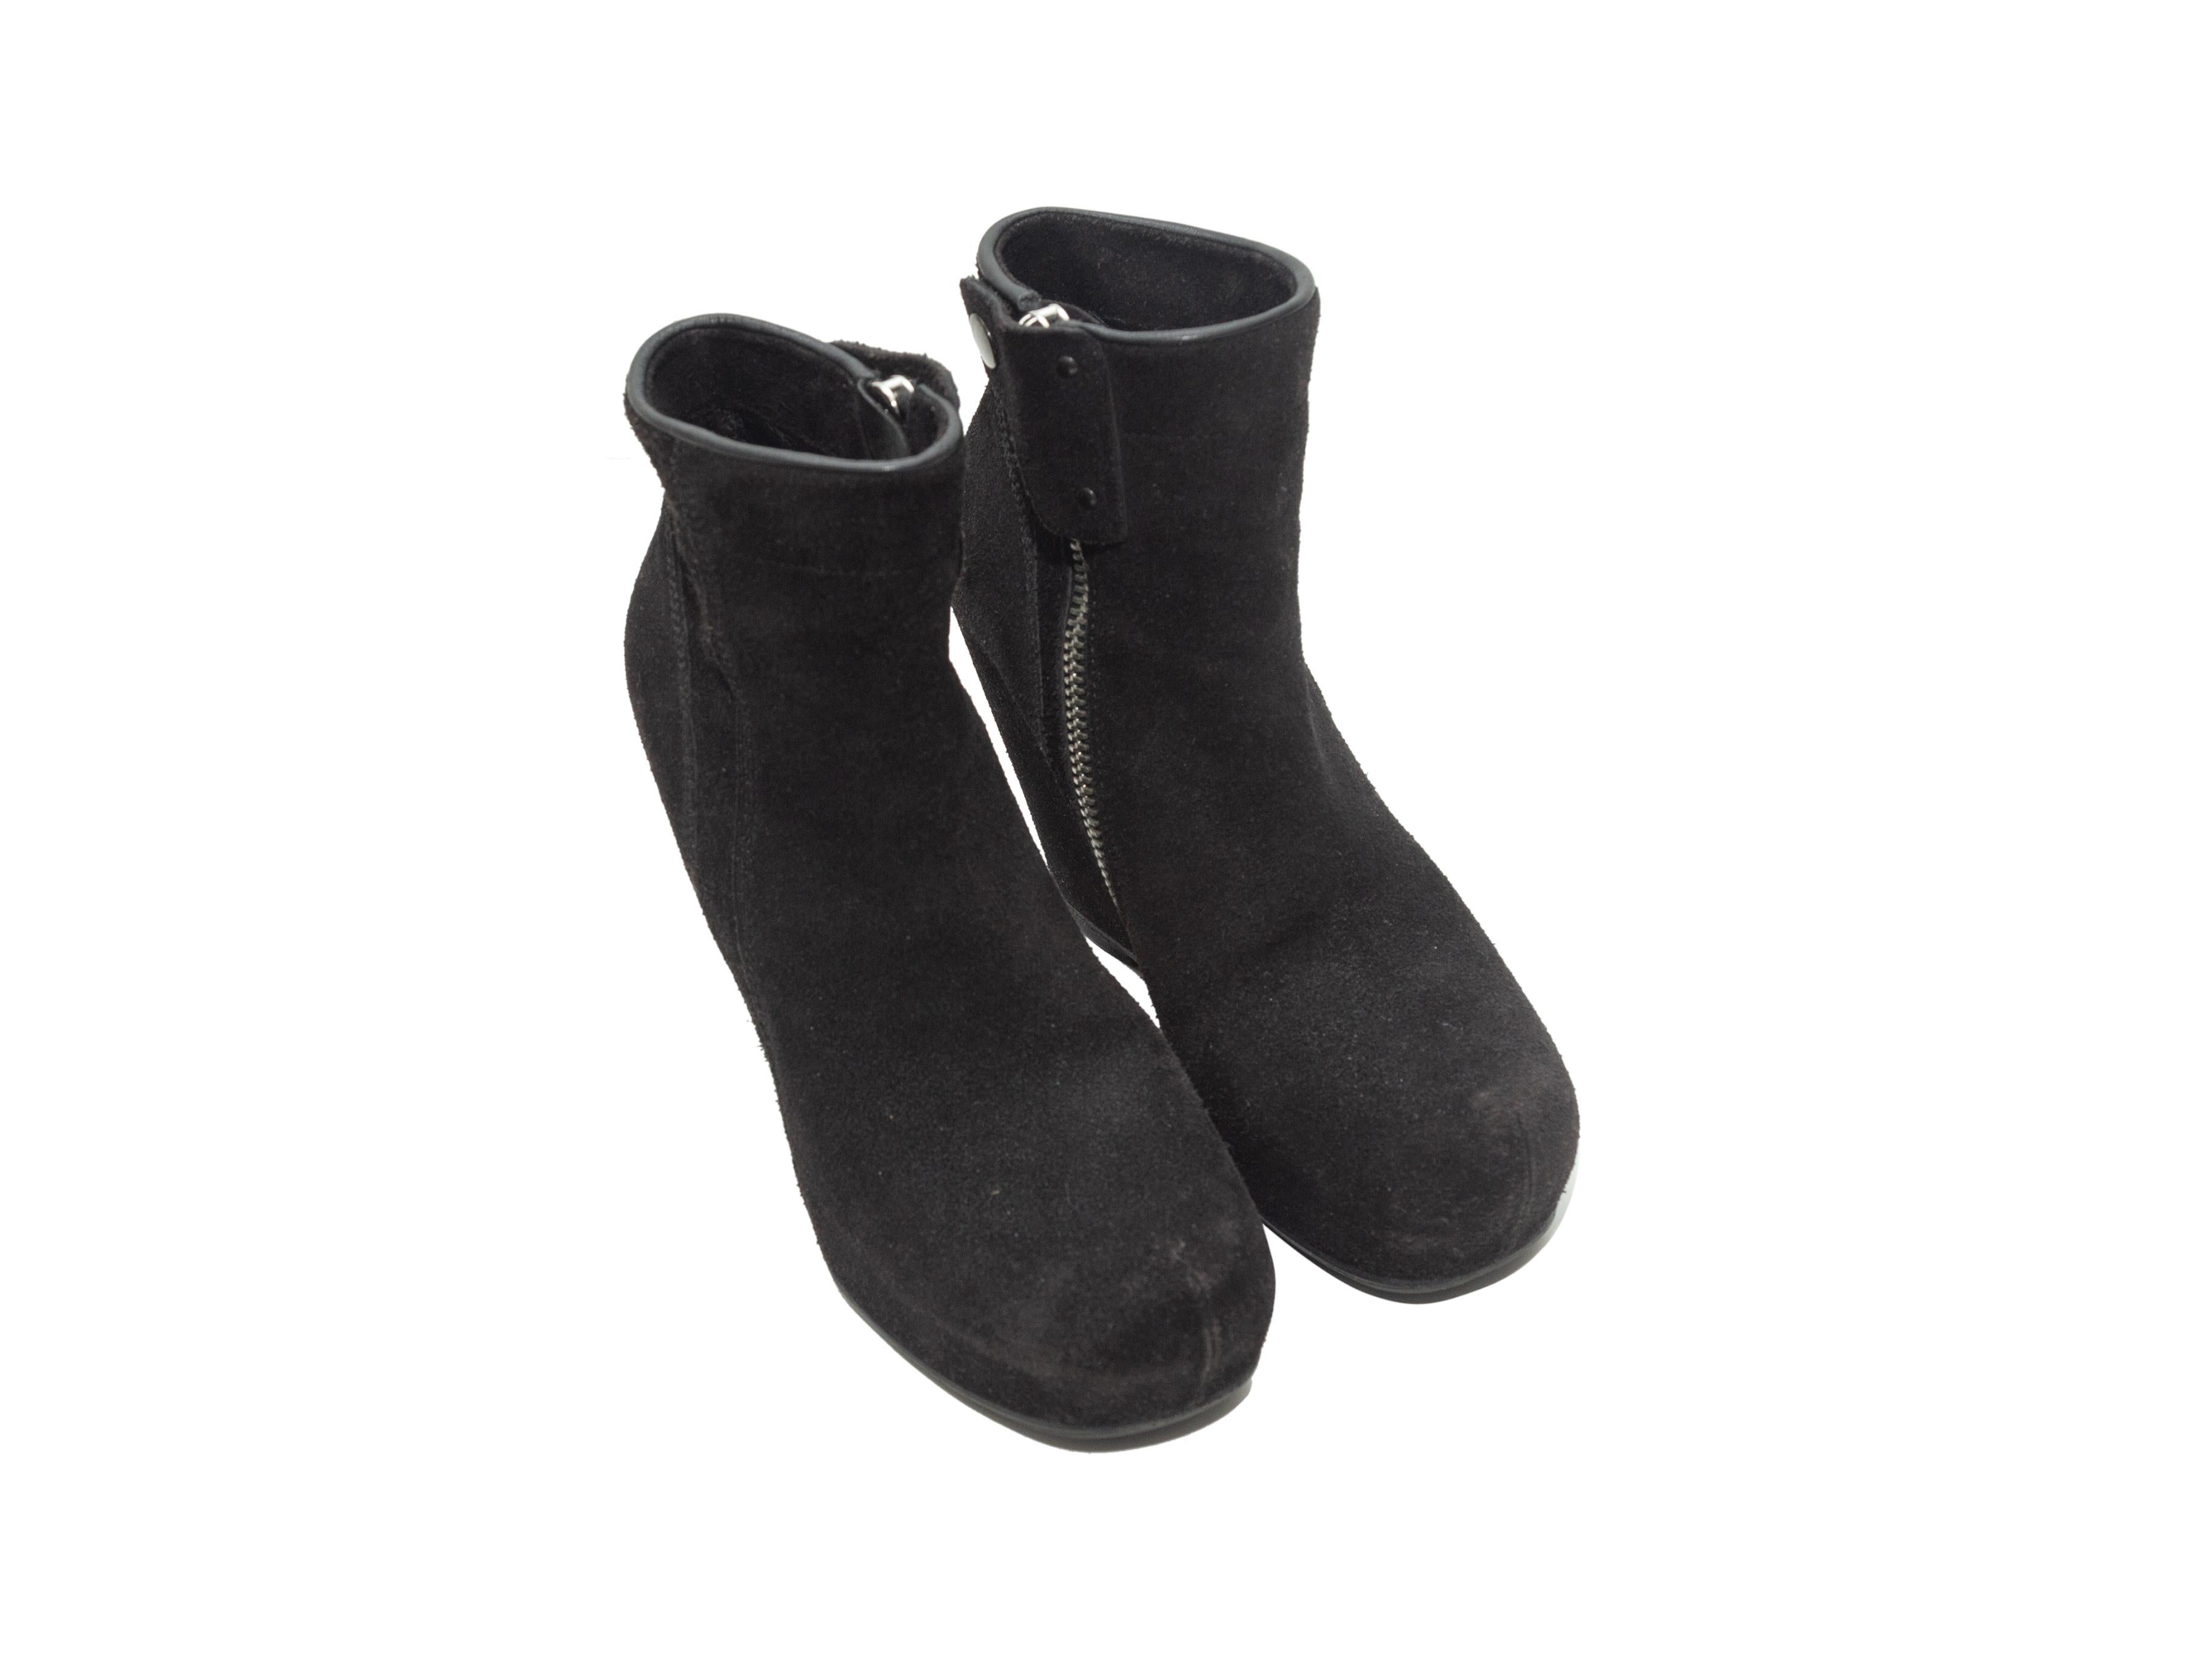 Product details: Black suede round-toe ankle boots by Rick Owens. Wedge heels. Zip closures at inner sides. 4